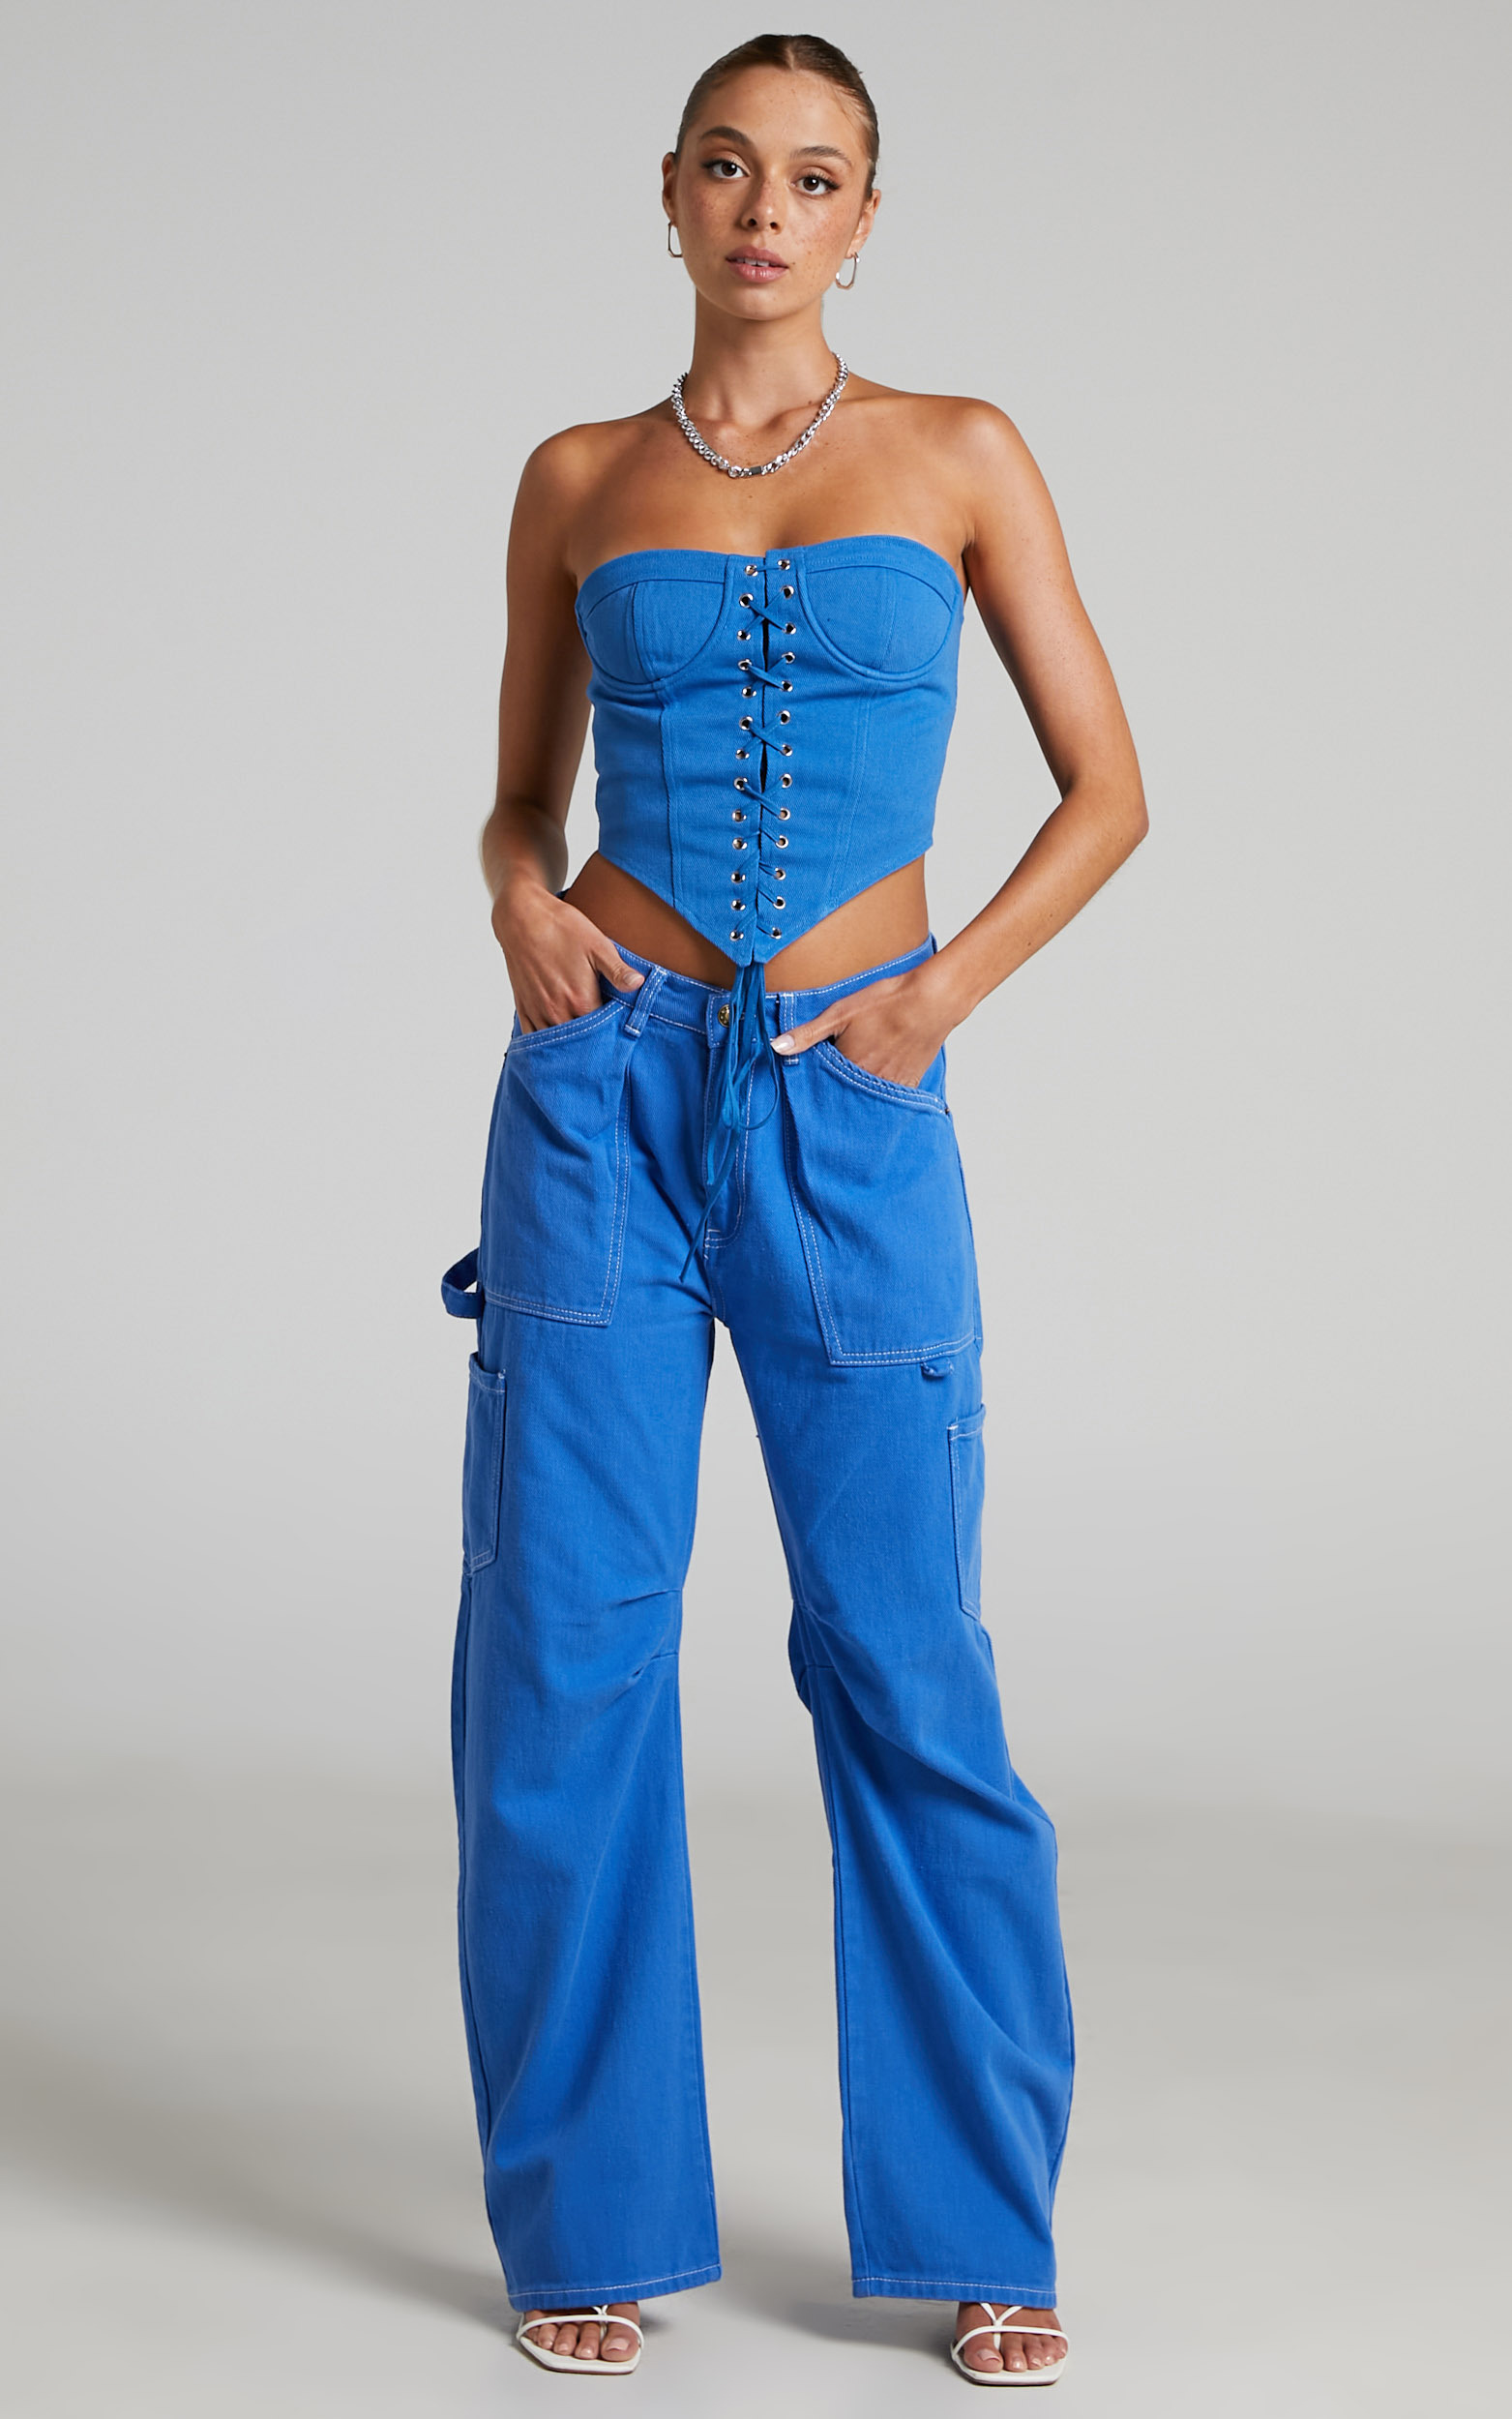 Lioness - Miami Vice Pants in Blue - L, BLU4, hi-res image number null